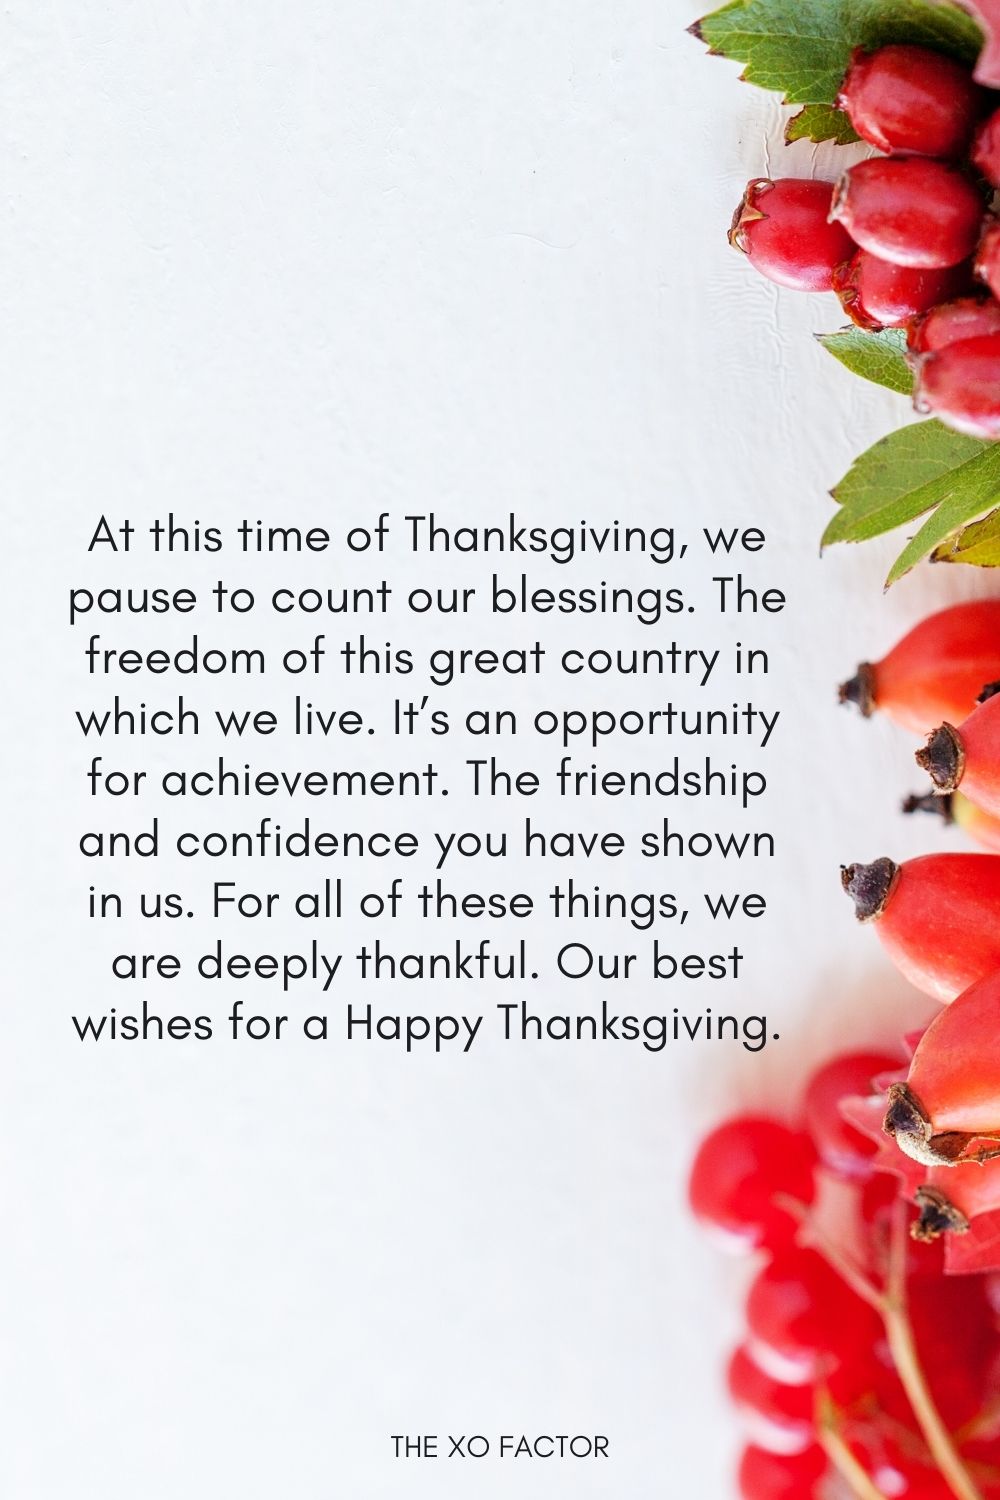 At this time of Thanksgiving, we pause to count our blessings. The freedom of this great country in which we live. It’s an opportunity for achievement. The friendship and confidence you have shown in us. For all of these things, we are deeply thankful. Our best wishes for a Happy Thanksgiving.